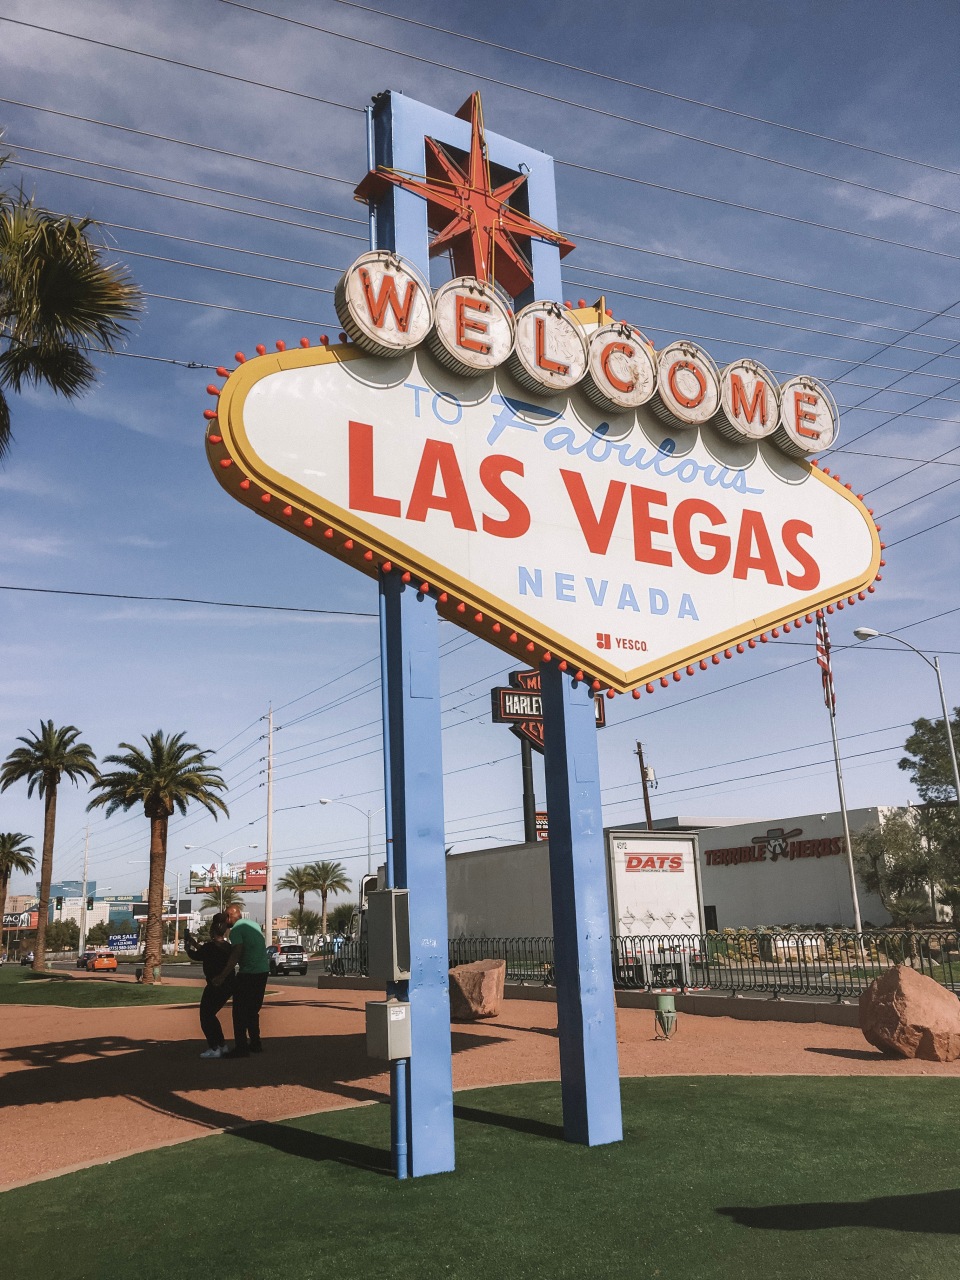 Visiting Vegas on a budget is possible with some of these tips!